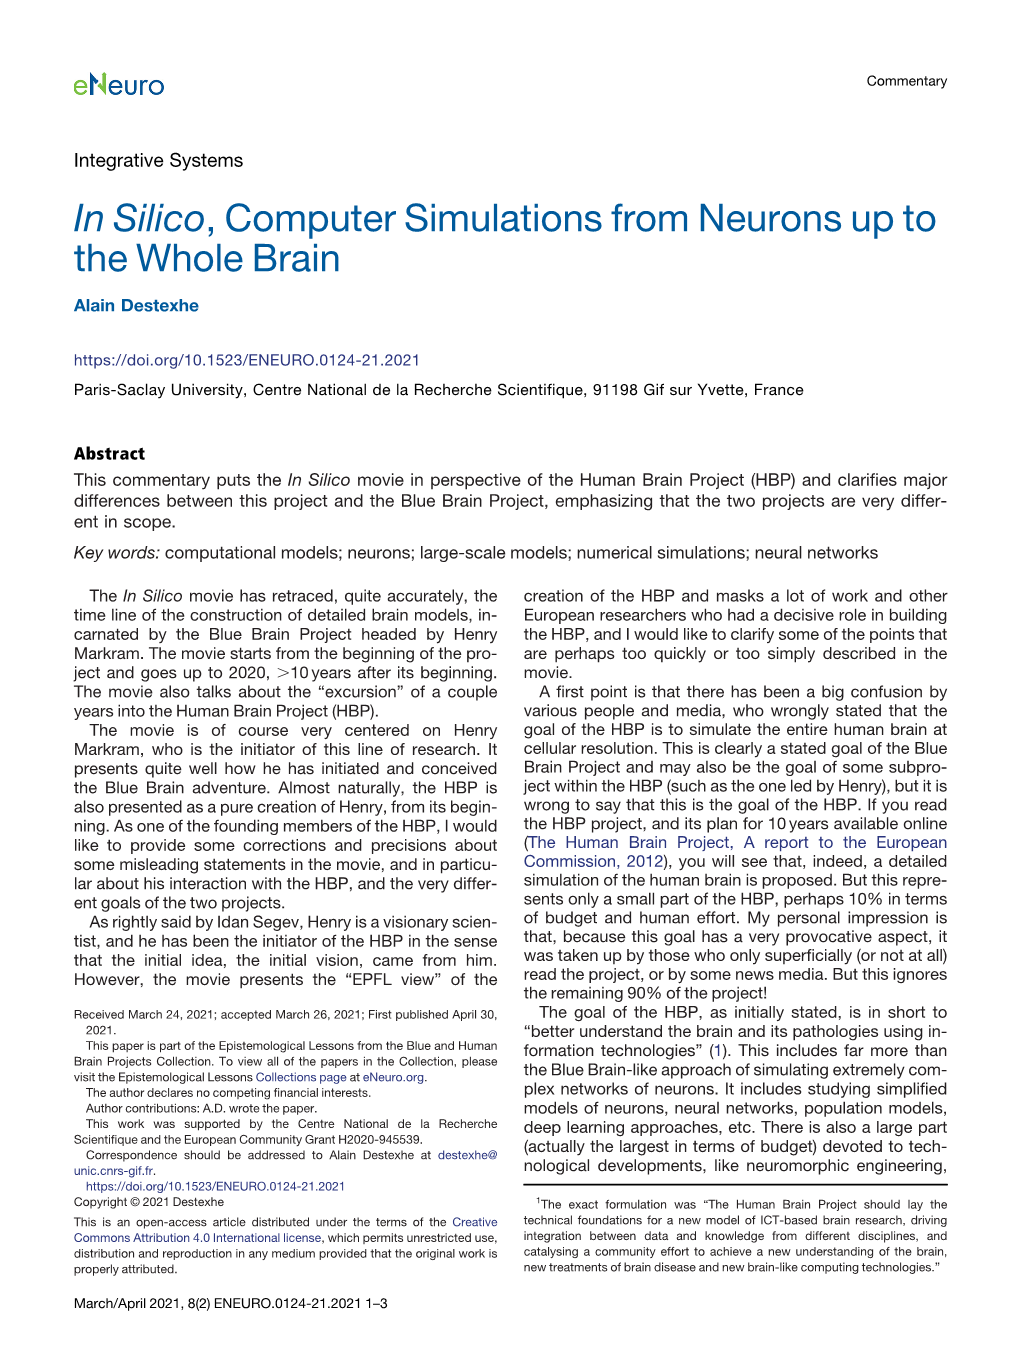 In Silico, Computer Simulations from Neurons up to the Whole Brain